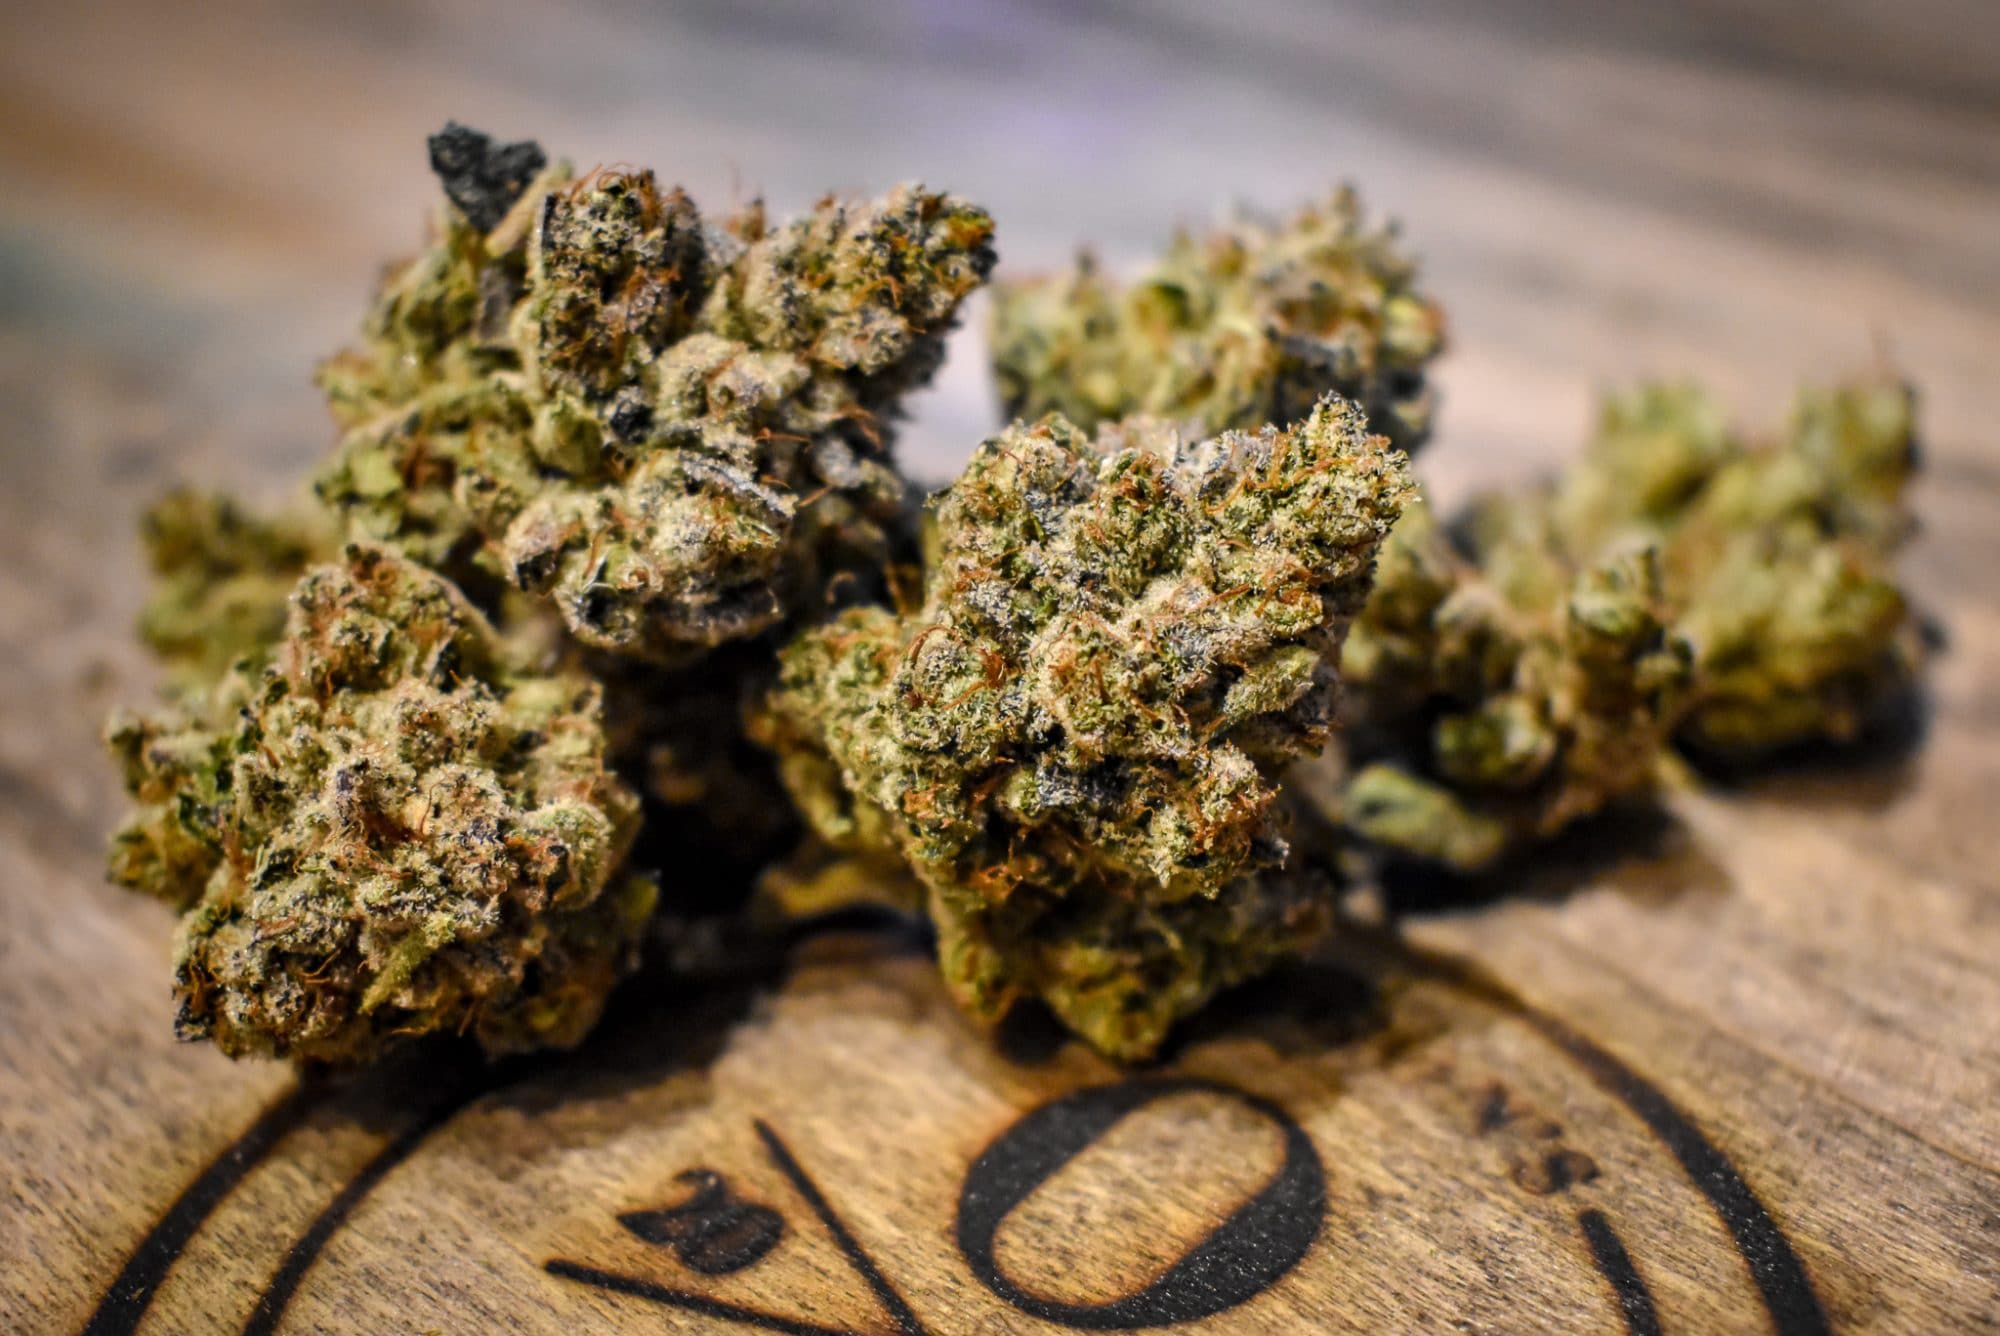 a close up of marijuana buds on a wooden board branded with the oregon's finest logo